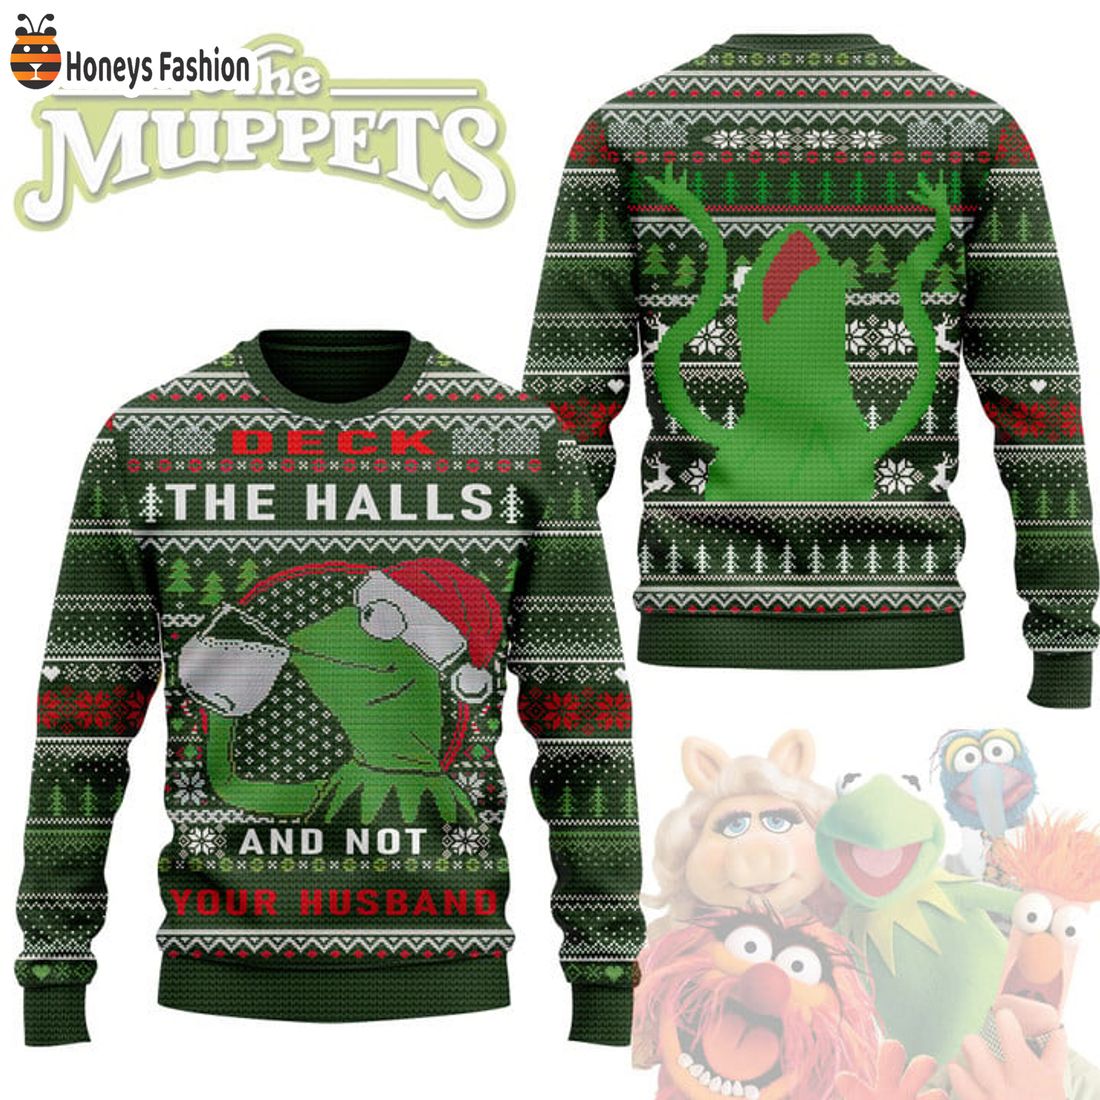 HOT The Muppets Duck The Halls And Not Your Husband Ugly Christmas Sweater